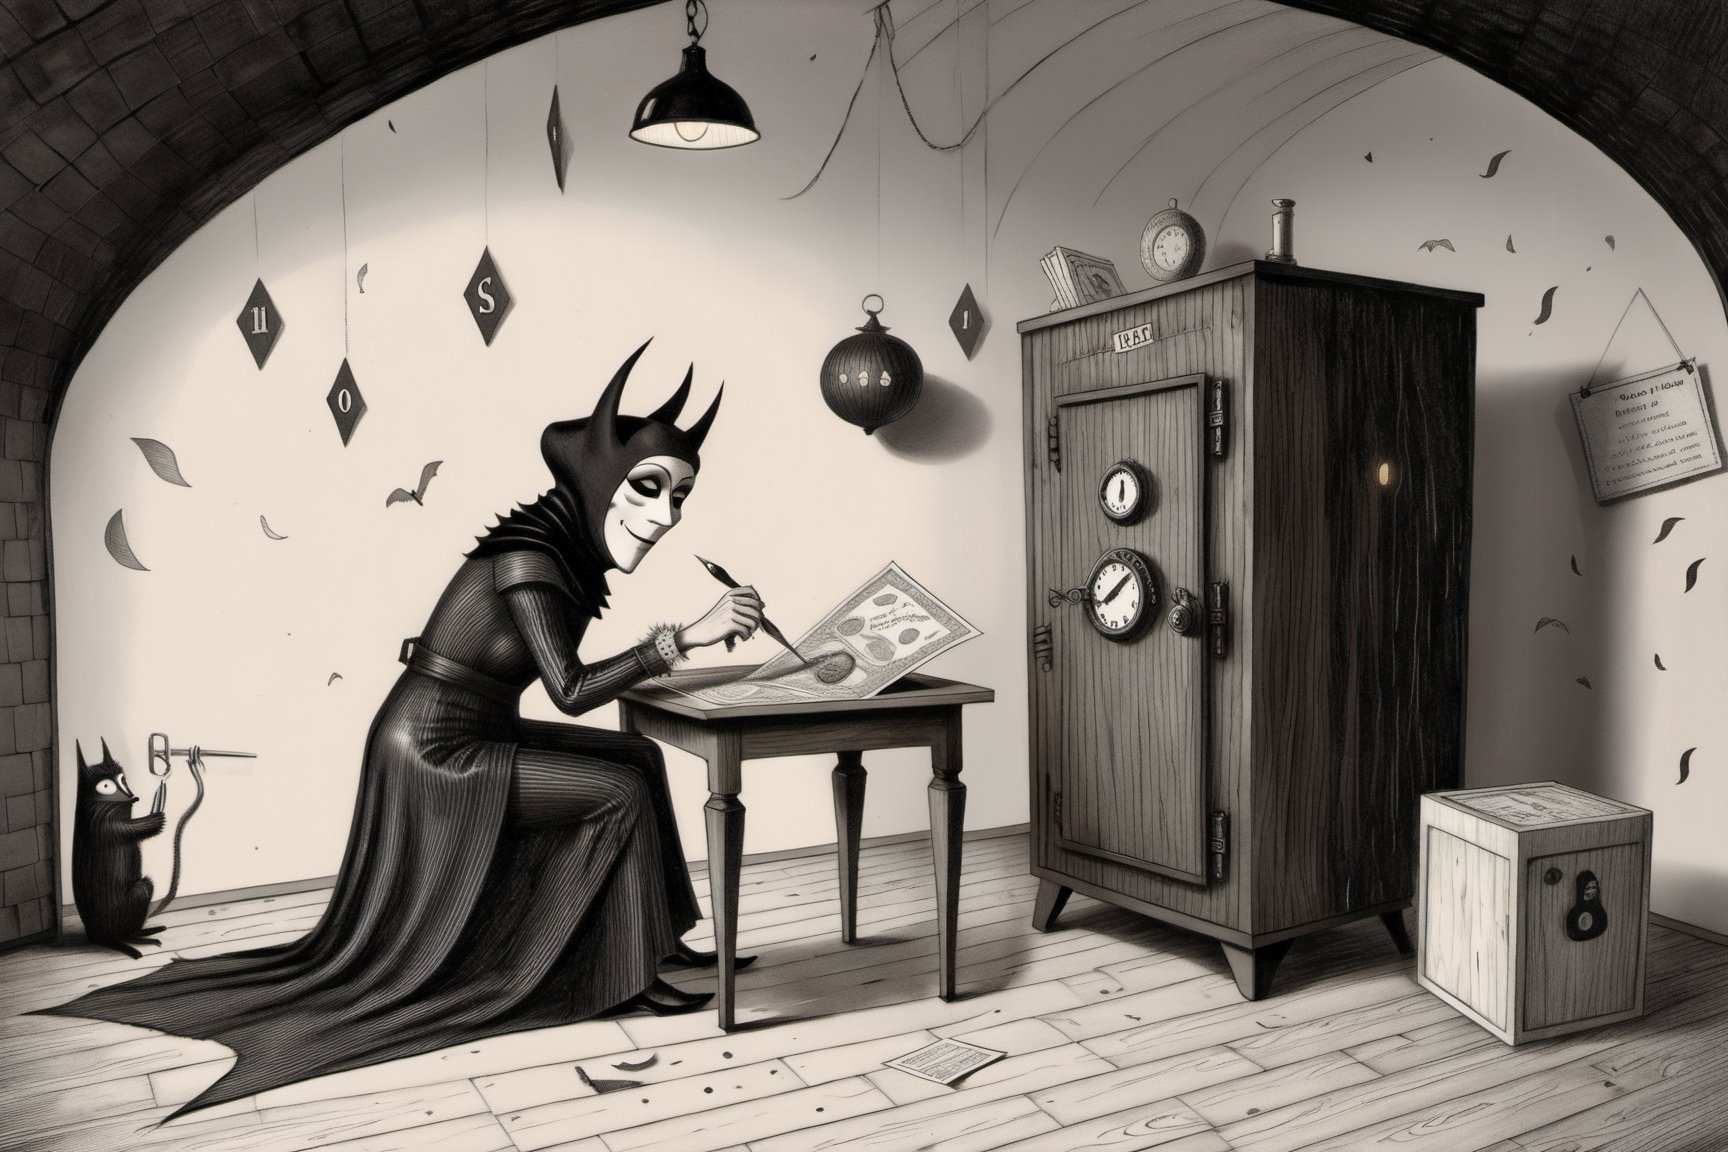 a woman in incarnival mask sitting at a smal table opening a big safe, Edward Gorey and comic style, tools on the ground, Line art, ink, monochrome,detailmaster2